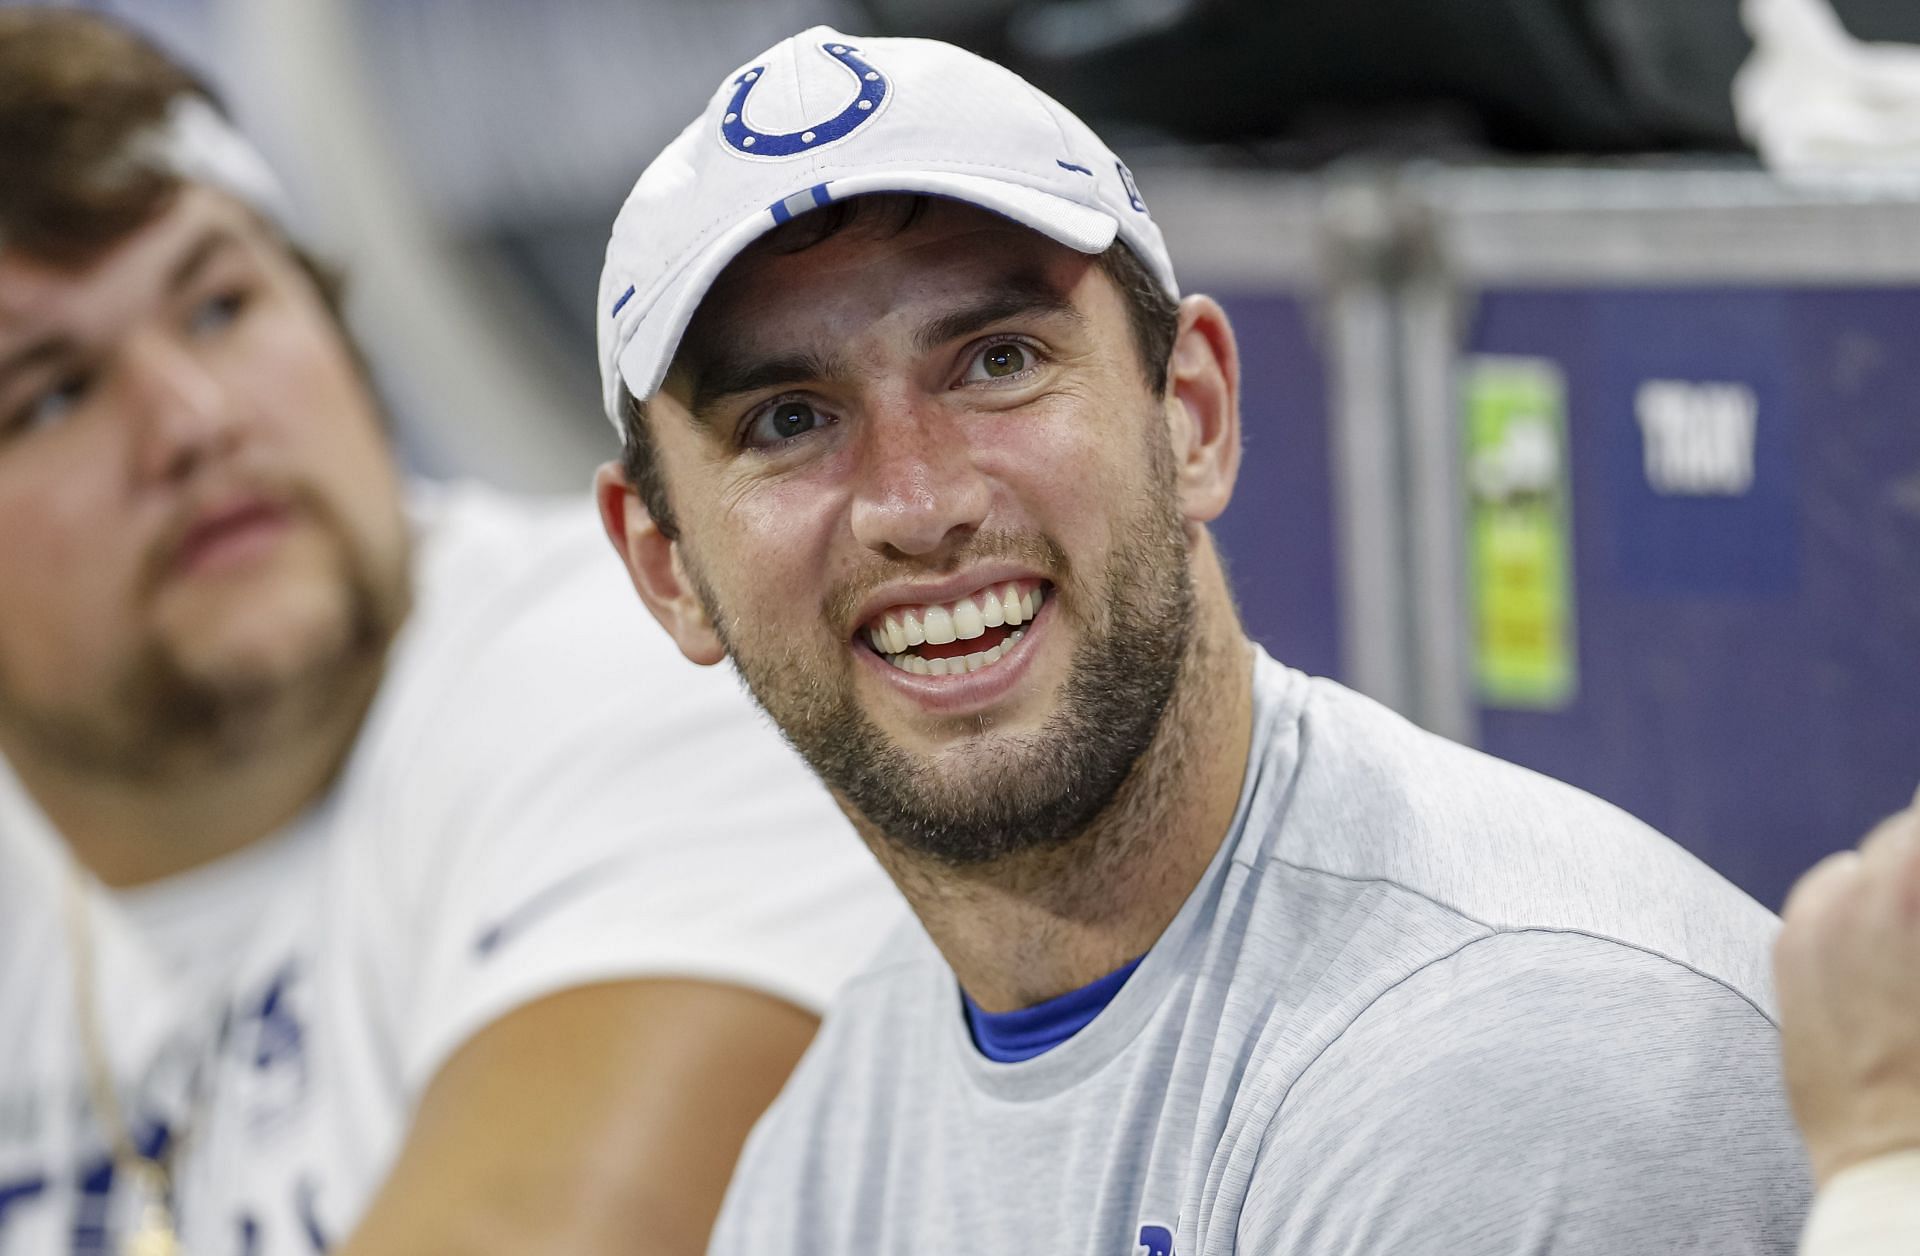 Former Indianapolis Colts quarterback Andrew Luck received praise from Bruce Arians